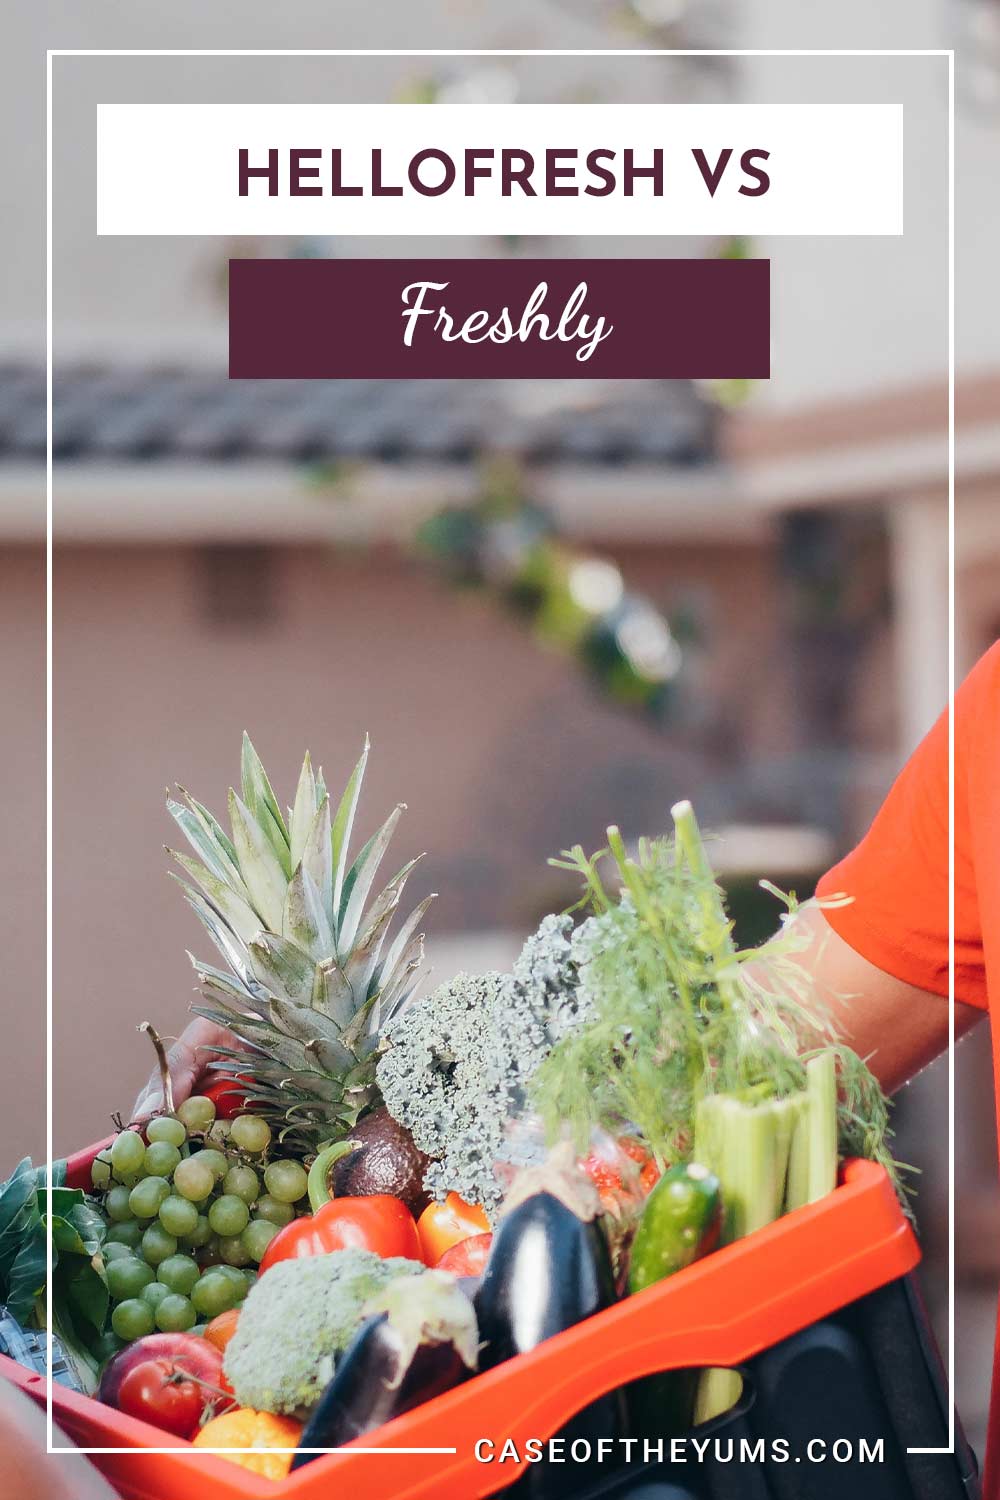 Fruits and vegetables on a plastic crate - HelloFresh vs Freshly